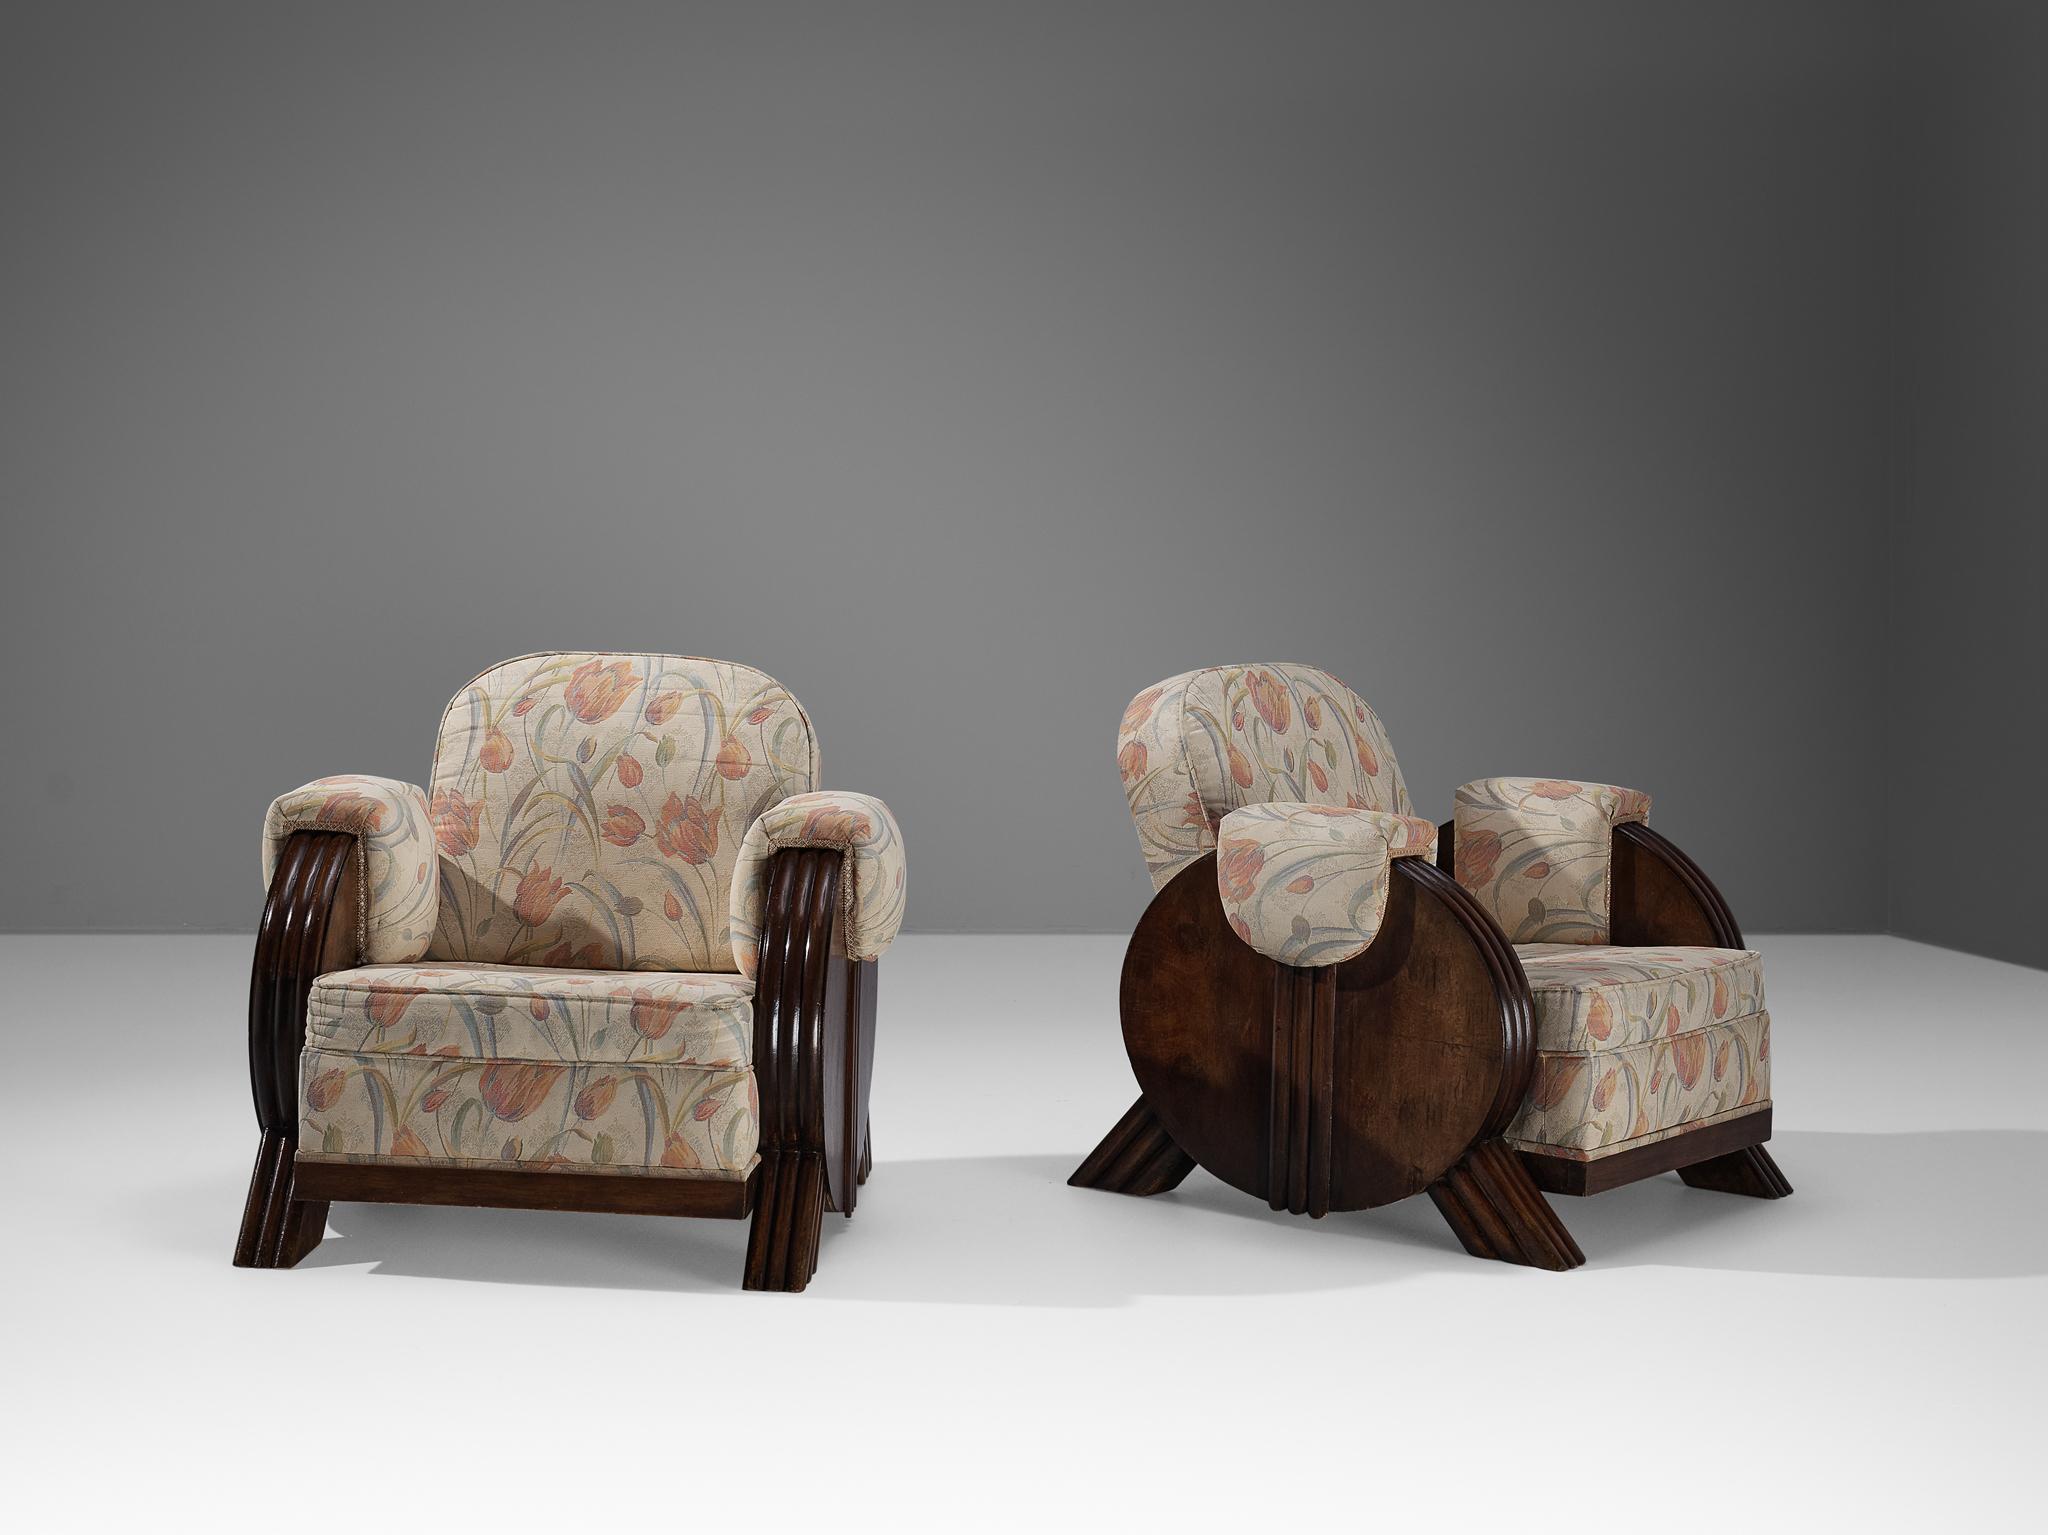 Italian Art Deco Pair of Lounge Chairs in Floral Upholstery and Wood 1